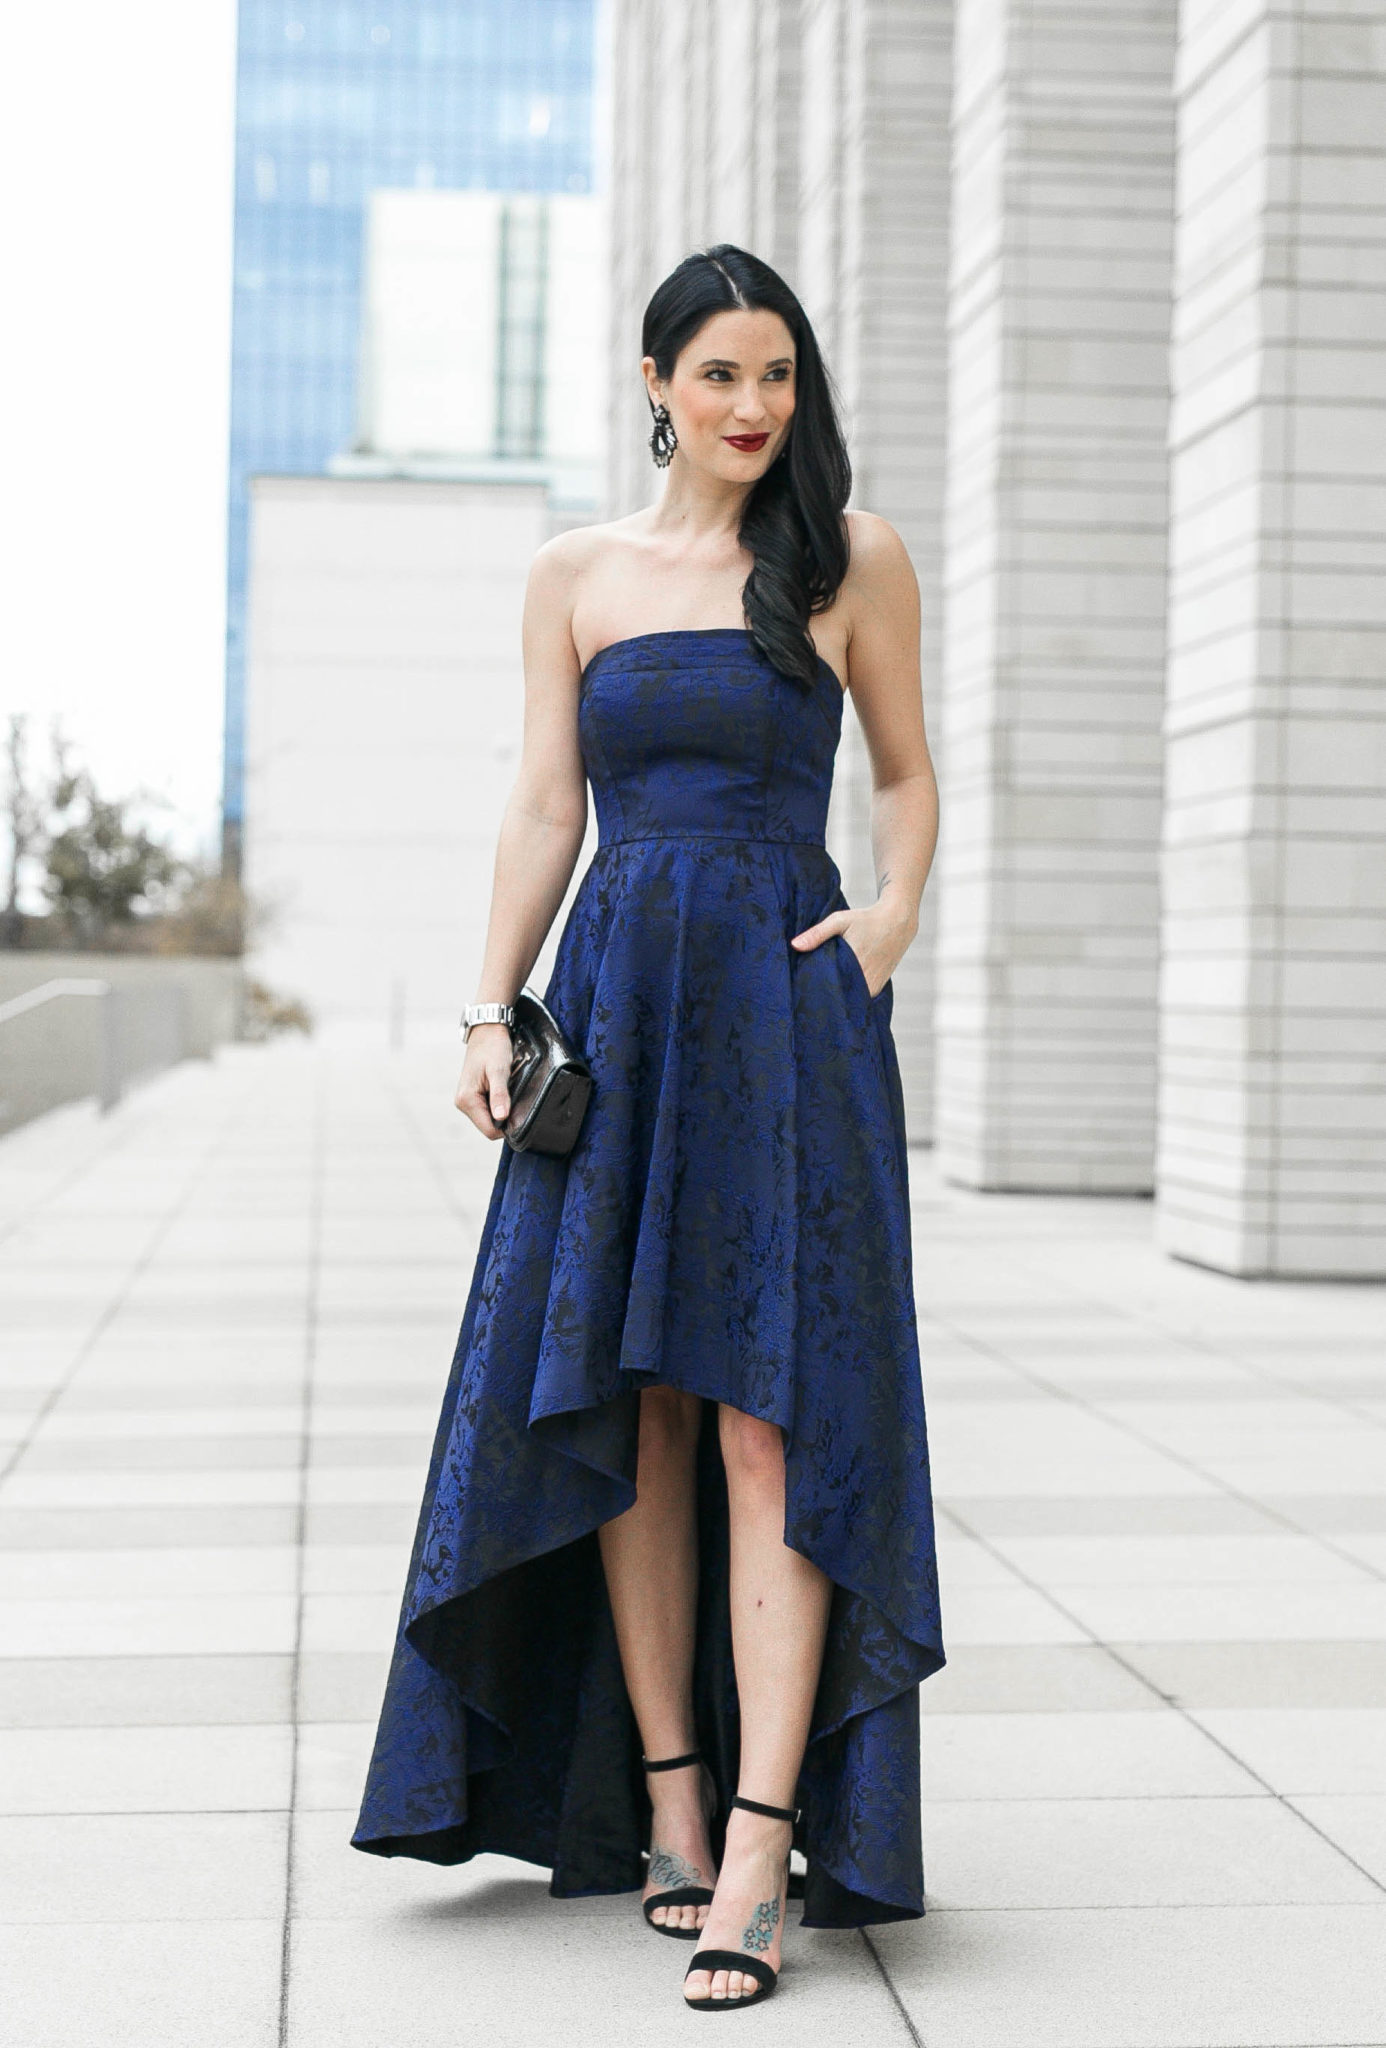 DTKAustin shares some of her favorite affordable gowns and dresses for special occasions or formal events. Laundry by Shelli Segal gown, Louis Vuitton clutch and Steve Madden heels. - High Low Dresses styled by popular Austin fashion blogger Dressed to Kill